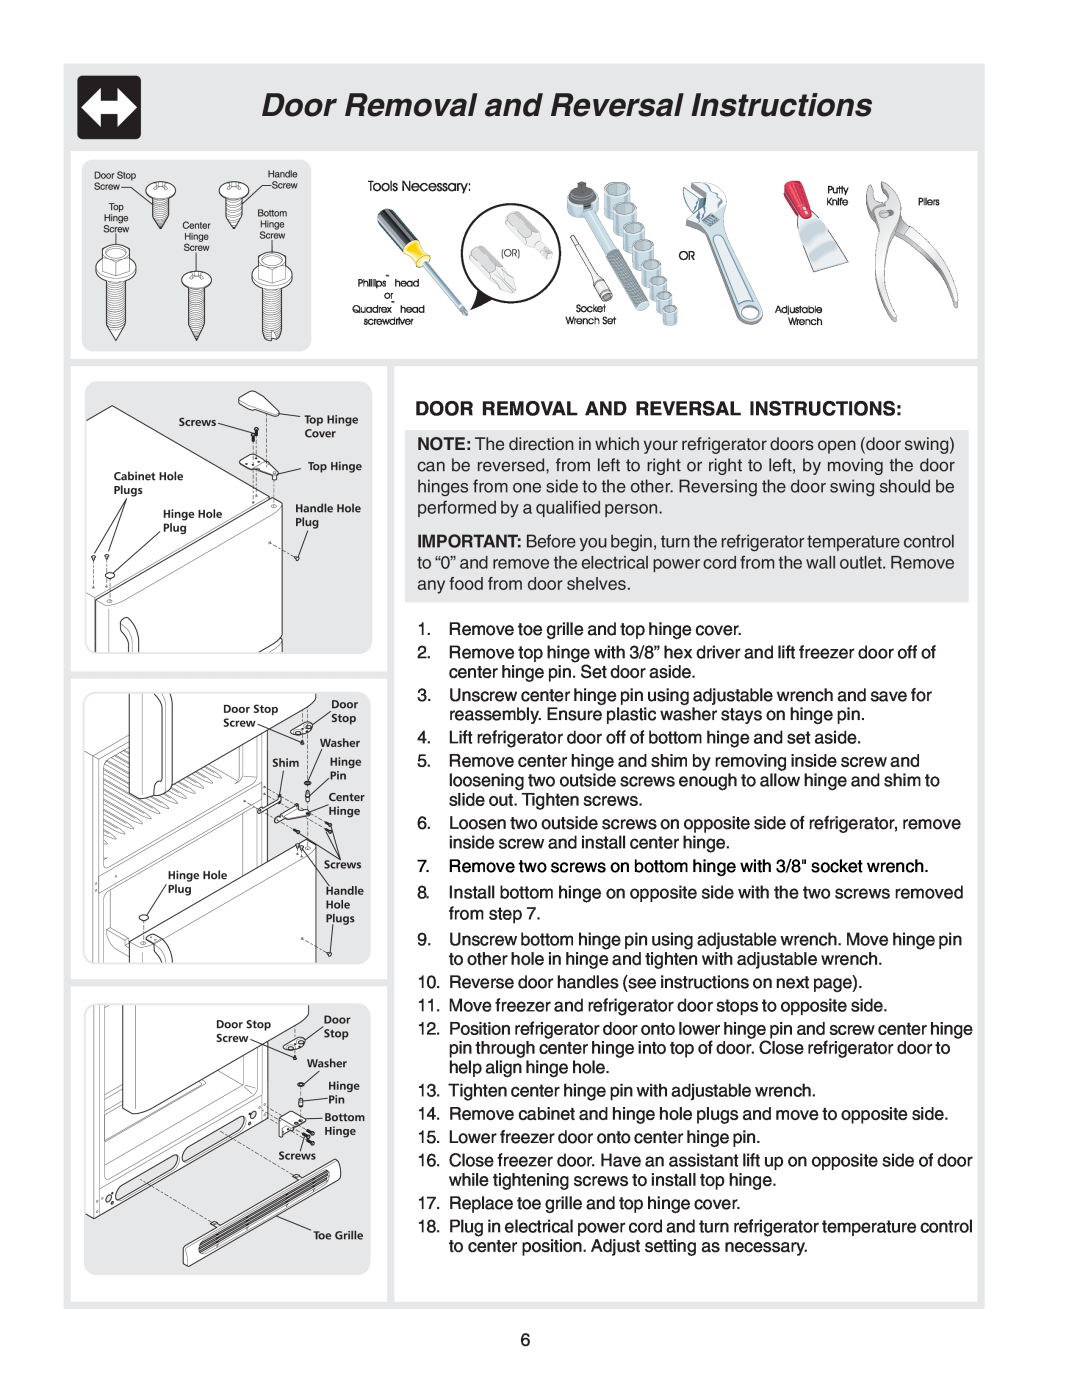 Electrolux - Gibson 240435505 manual Door Removal and Reversal Instructions, Door Removal And Reversal Instructions 